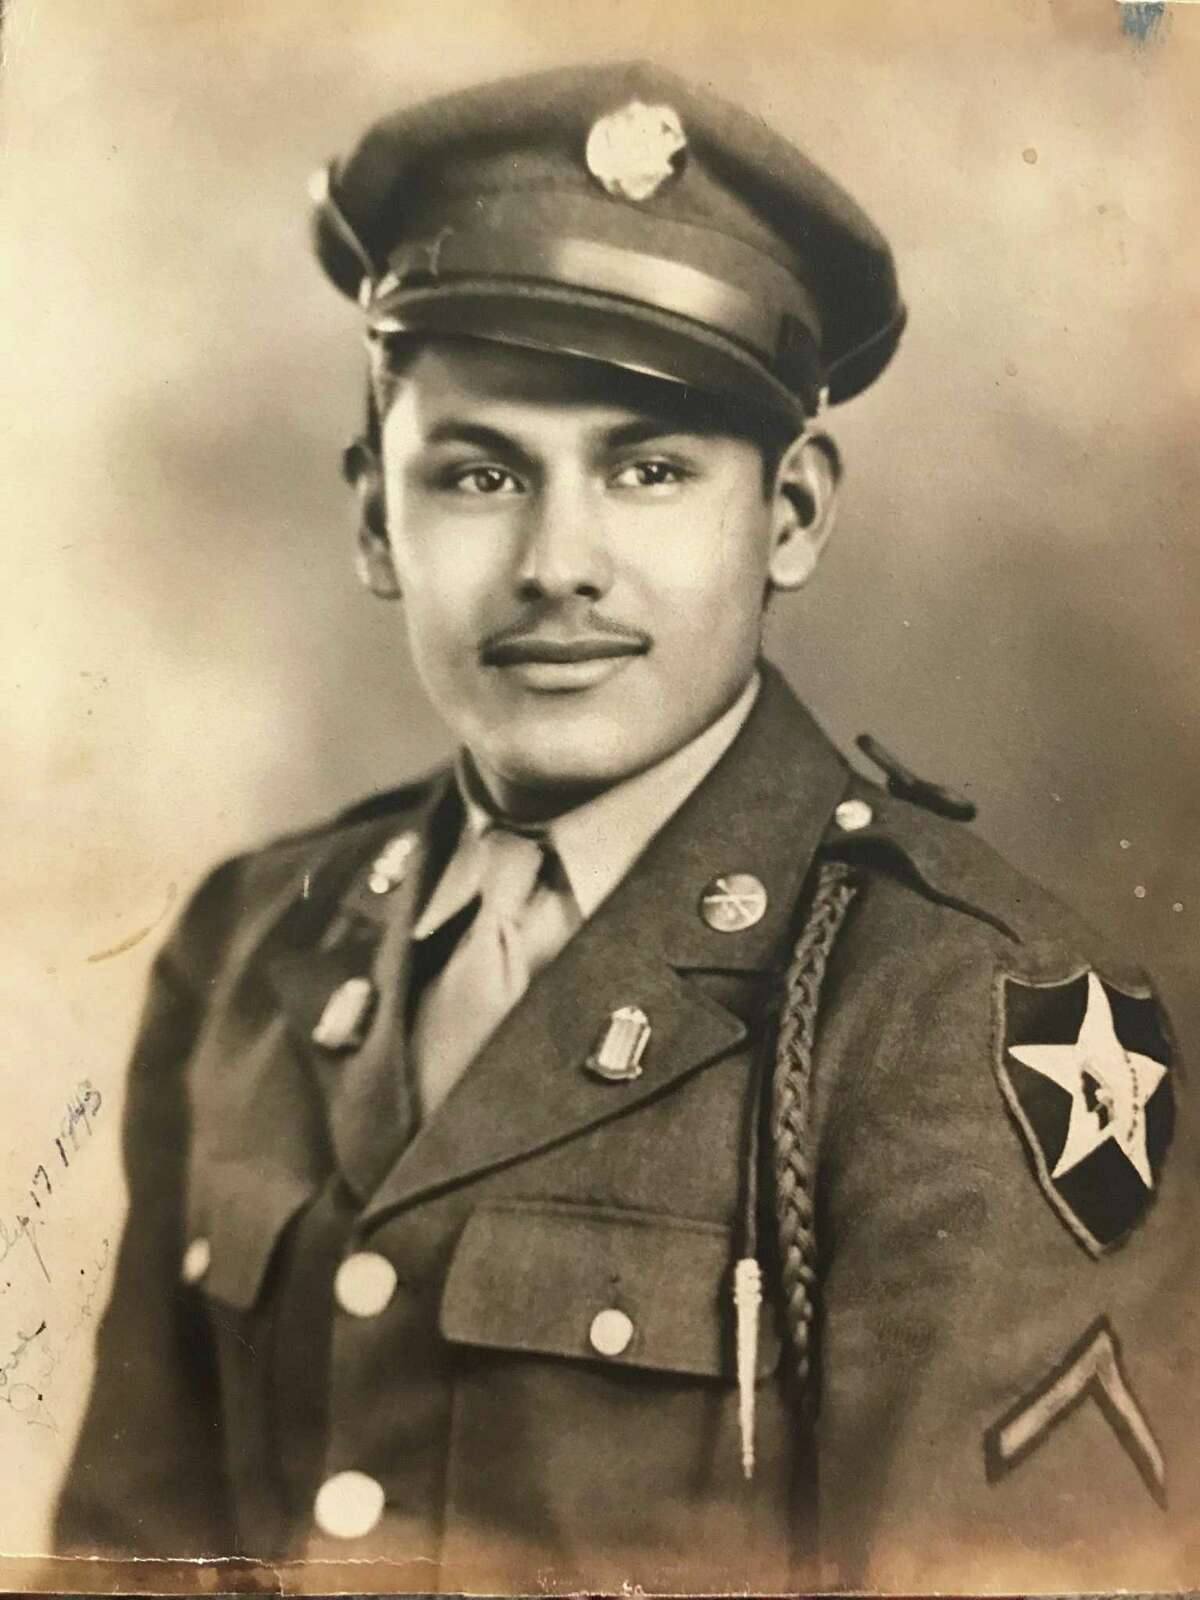 Johnnie Marino was a U.S. soldier from Texas who liberated concentration camps at the end of World War II. He, and others, are featured in a new exhibit at the Holocaust Museum Houston, titled “The Texas Liberator: Witness to the Holocaust.”